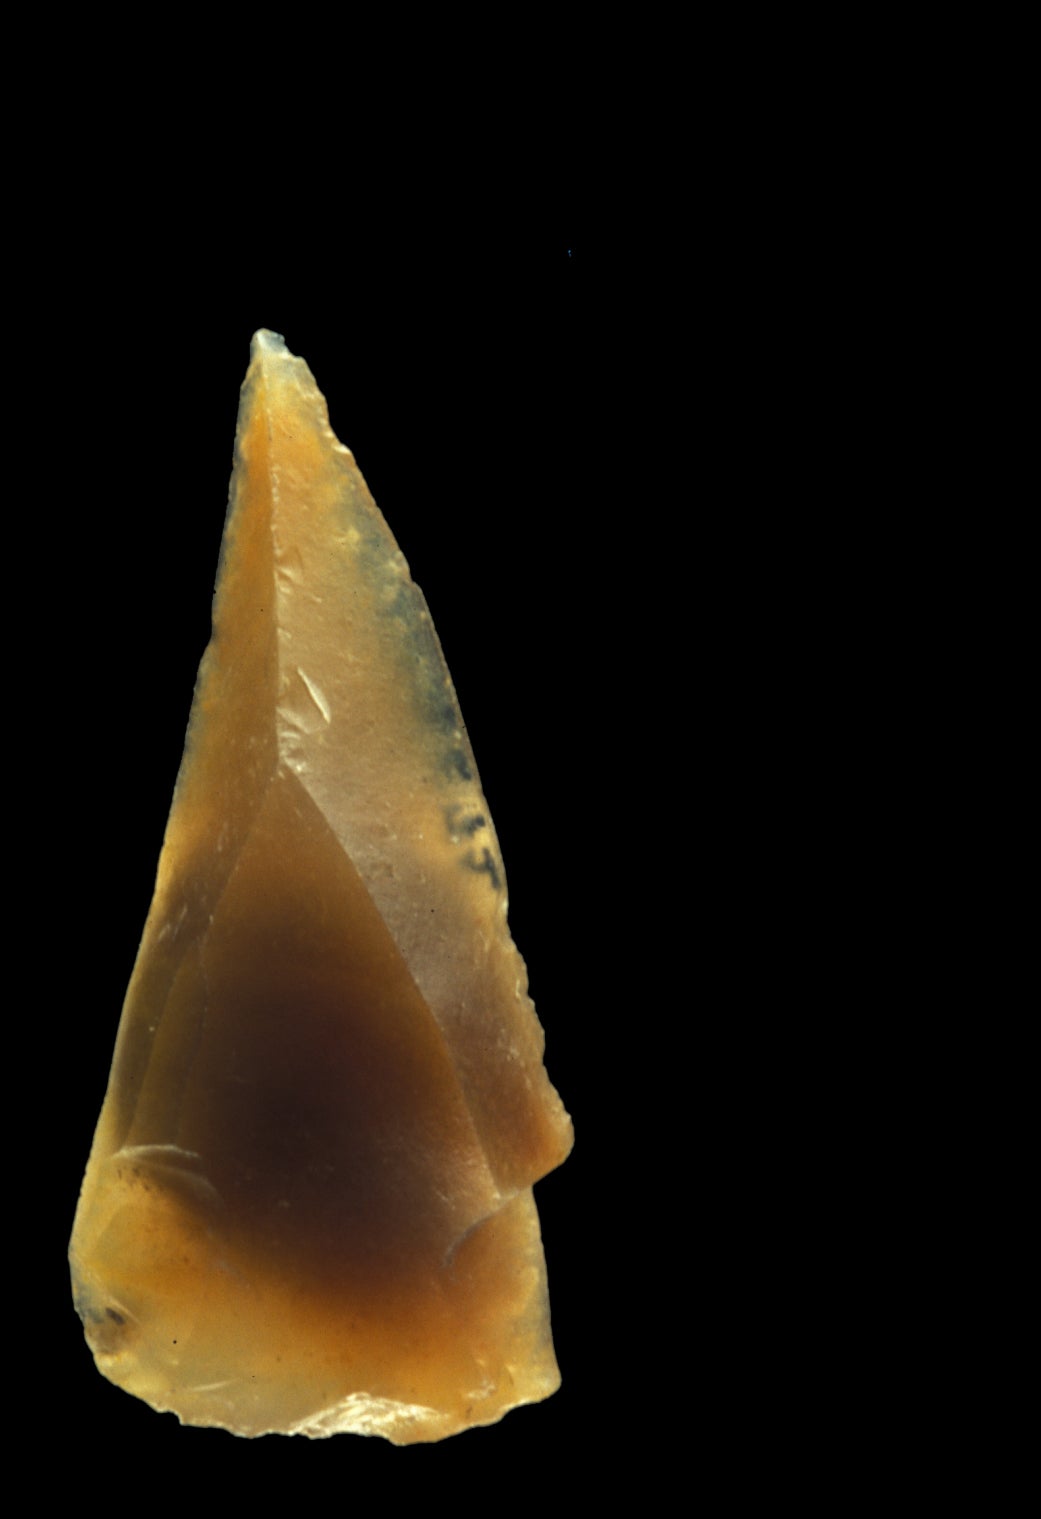 The team found flint tools in the Grotte Mandrin cave, believed to have been made by Homo sapiens hunters